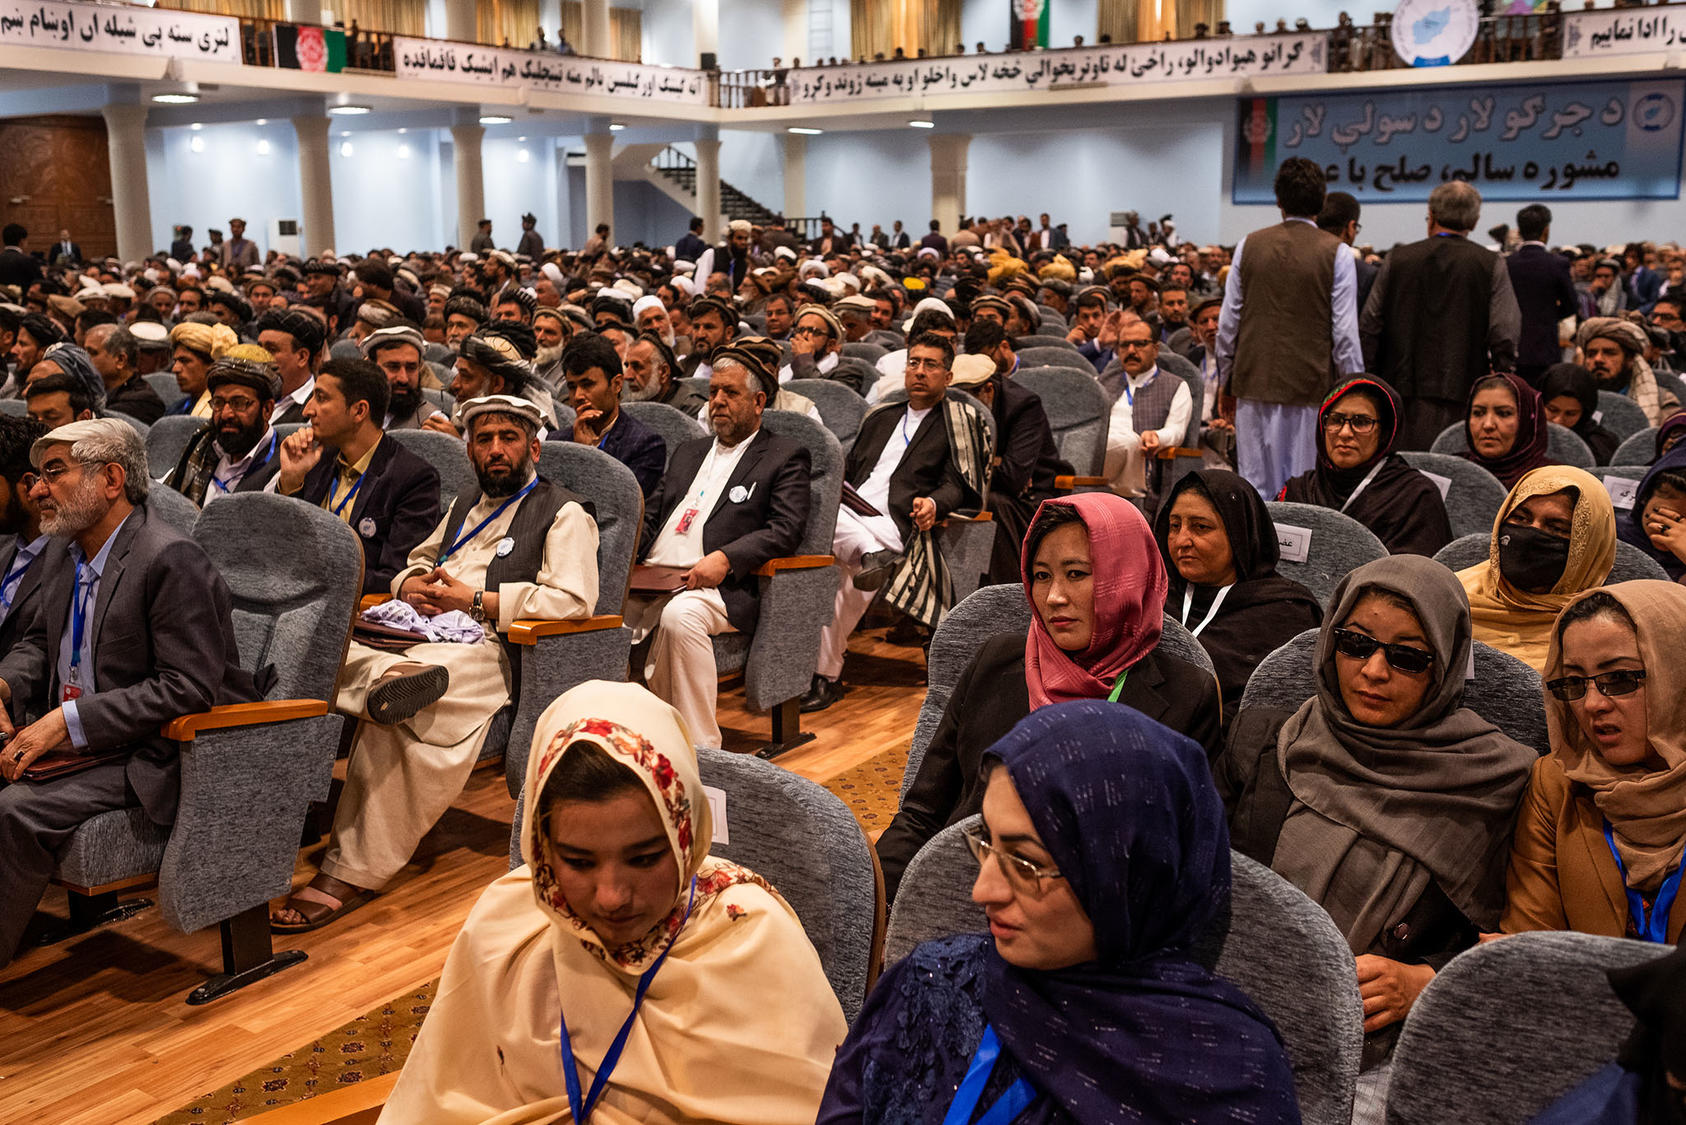 The opening session of the loya jirga, a yearly tribal assembly where some 30 percent of participants are now women, in Kabul, Afghanistan, April 29, 2019. (Jim Huylebroek/The New York Times)